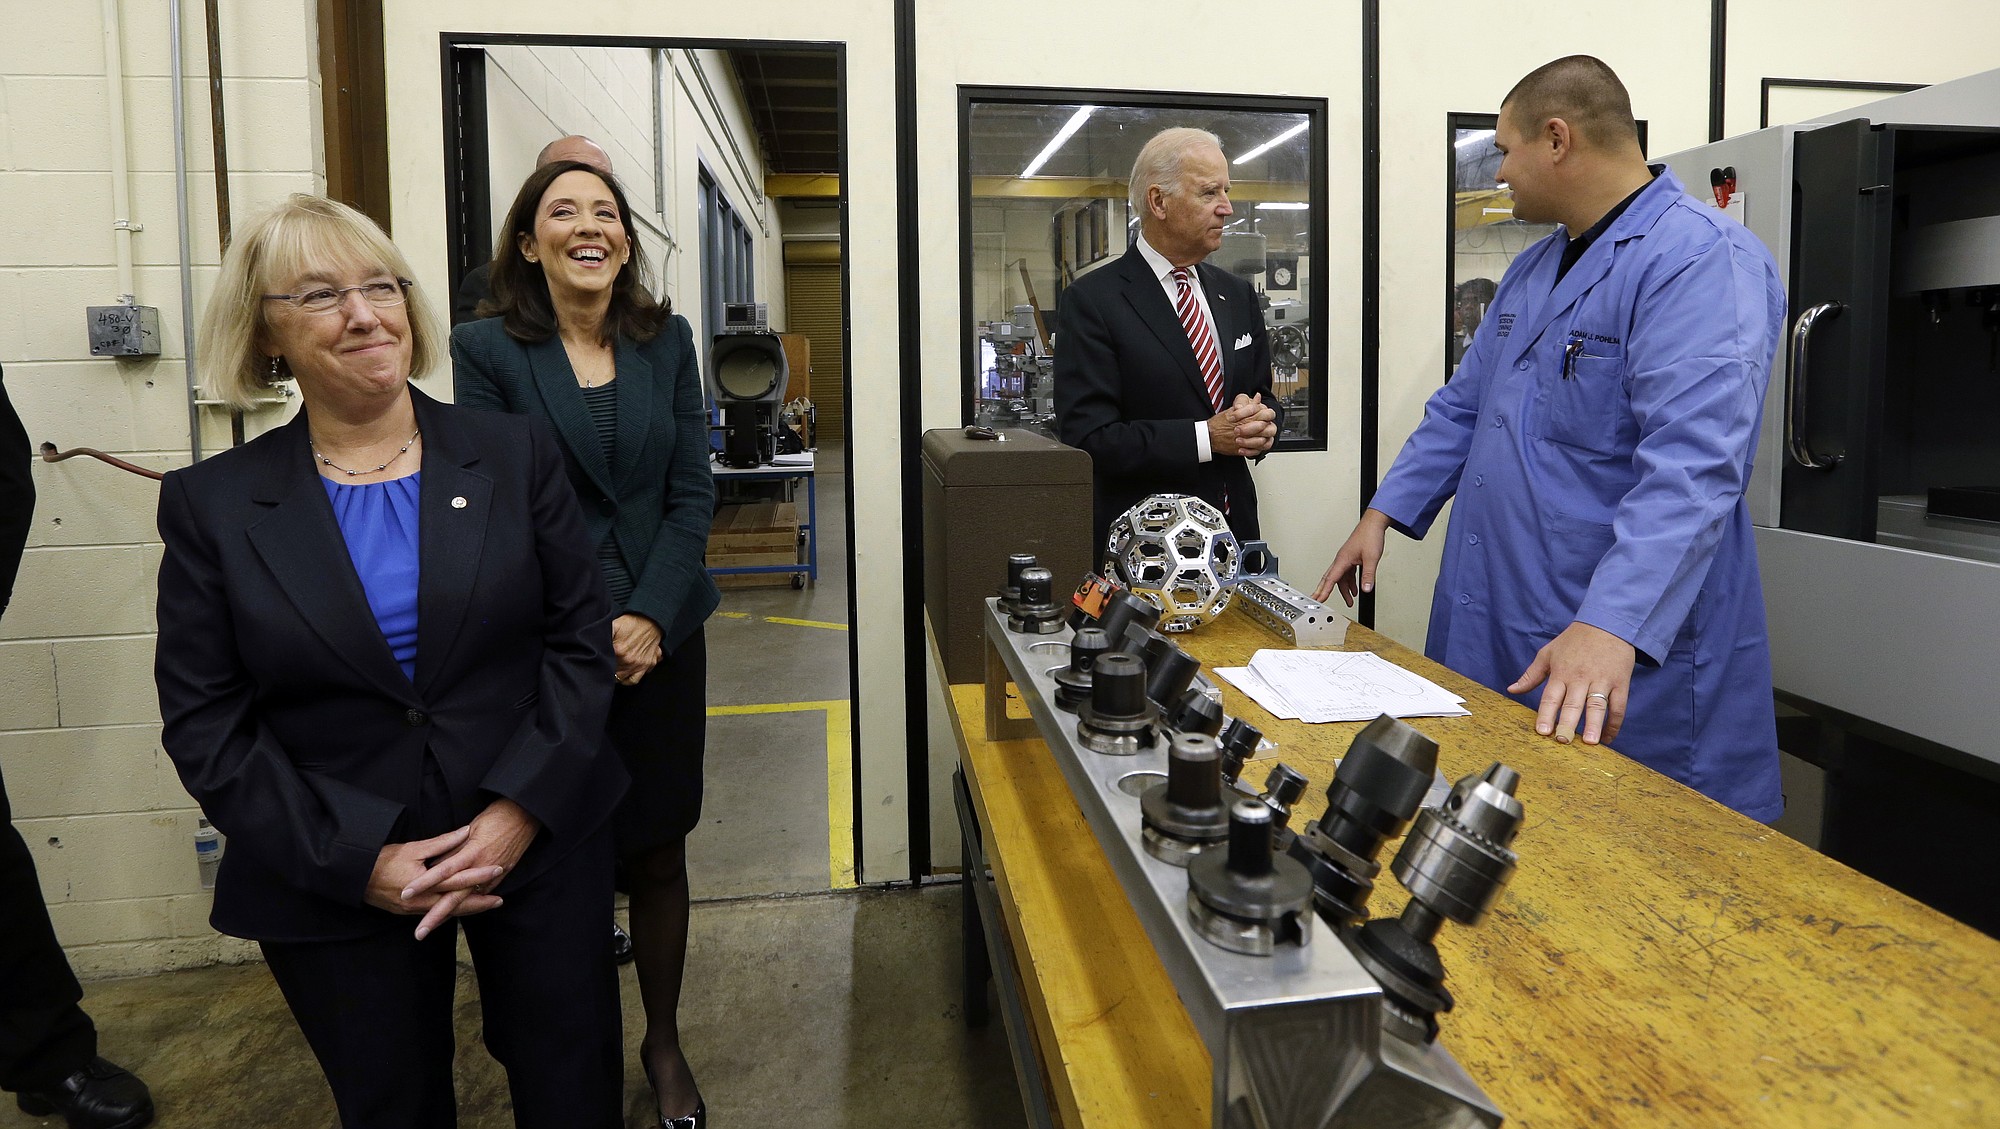 Sen. Patty Murray, D-Wash., left, and Sen. Maria Cantwell, D-Wash., second from left, walk into a shop as Vice President Joe Biden speaks with instructor Adam Pohlman at Renton Technical College in Renton, Wash., Thursday, Oct. 9, 2014. Biden discussed workplace and economic issues Thursday morning at the school and as part of a West Coast political swing, will also attend a luncheon in Seattle with Sen. Maria Cantwell.